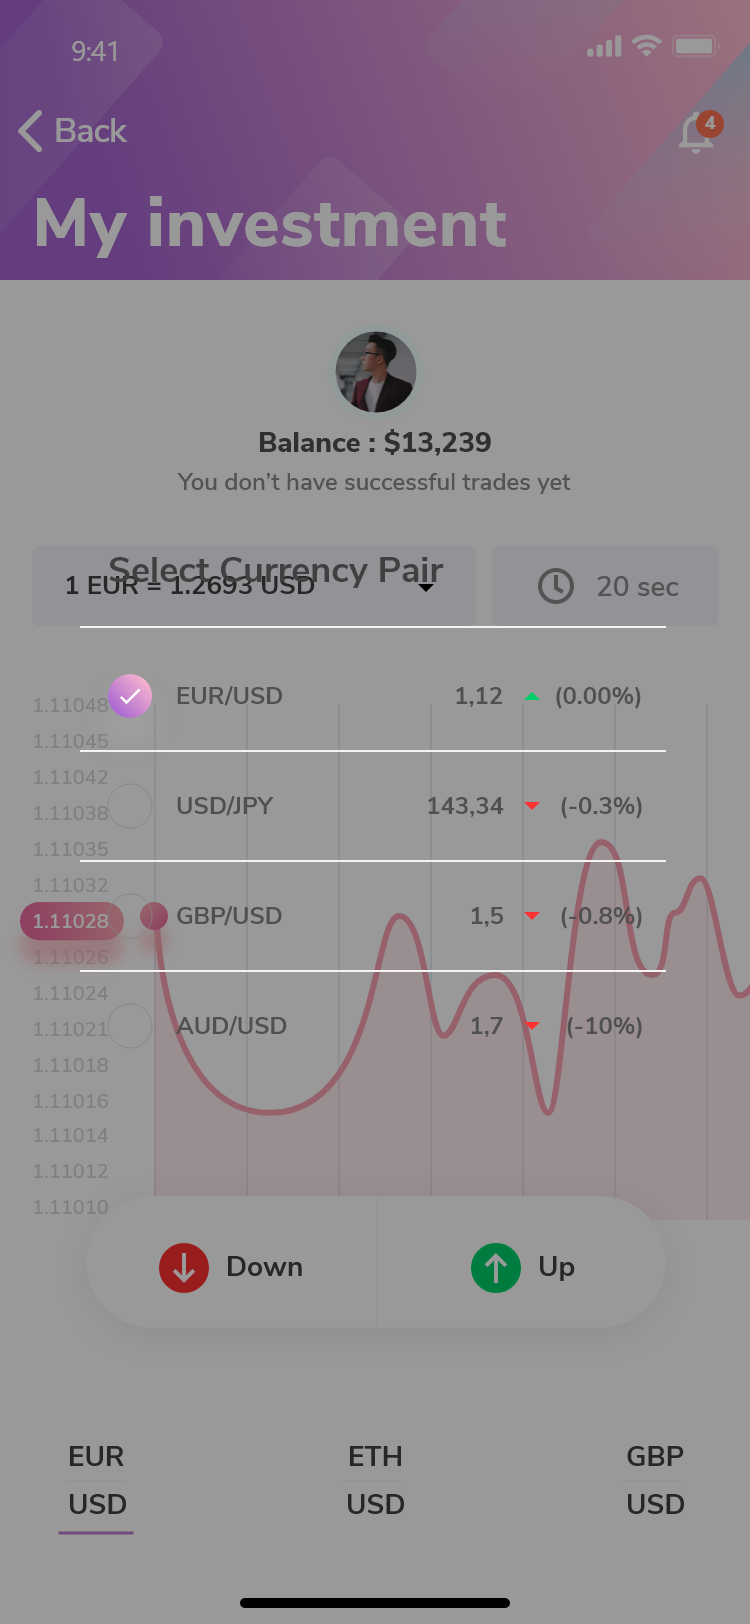 My investment Screen